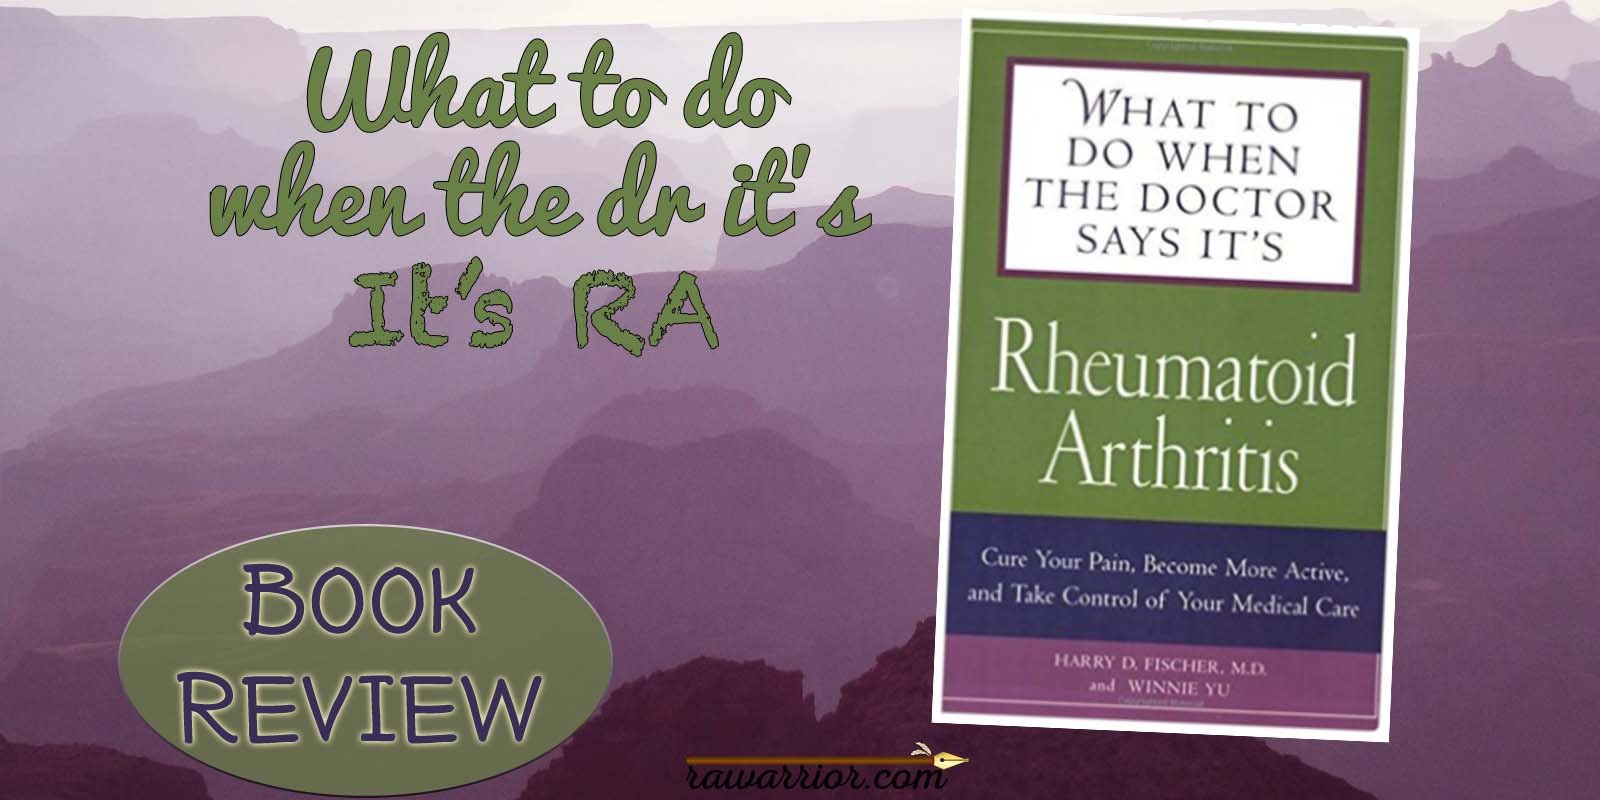 What to Do When the Doctor Says Its Rheumatoid Arthritis